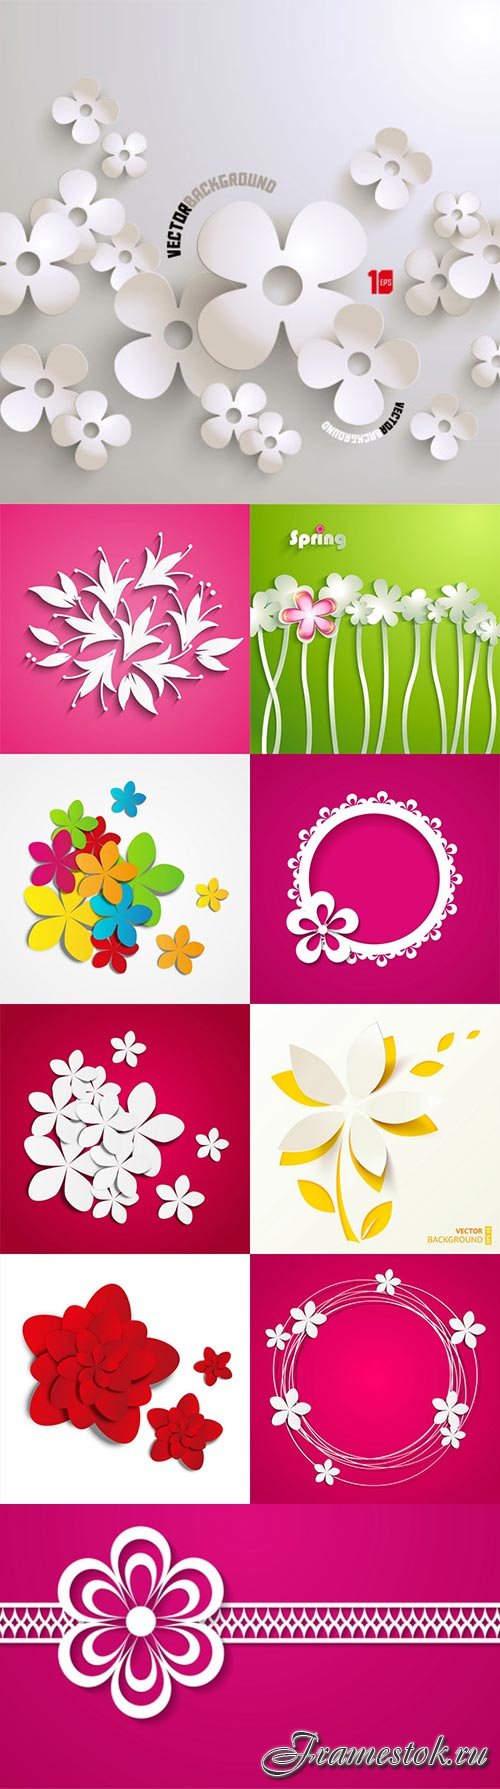 Flowers cut from paper